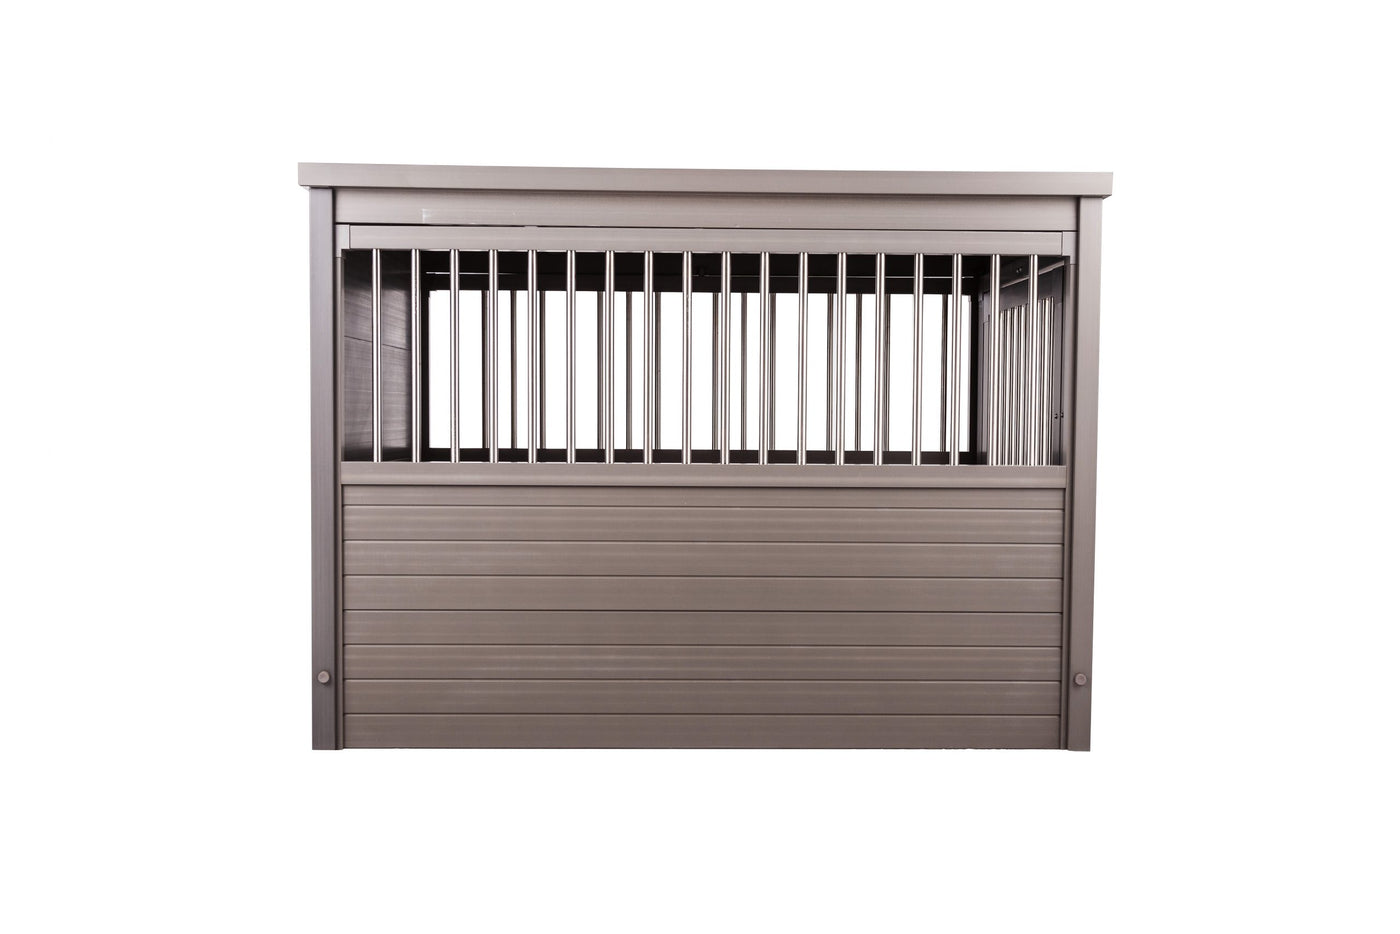 New Age Pet ECOFLEX InnPlace Crate with Stainless Steel Spindles